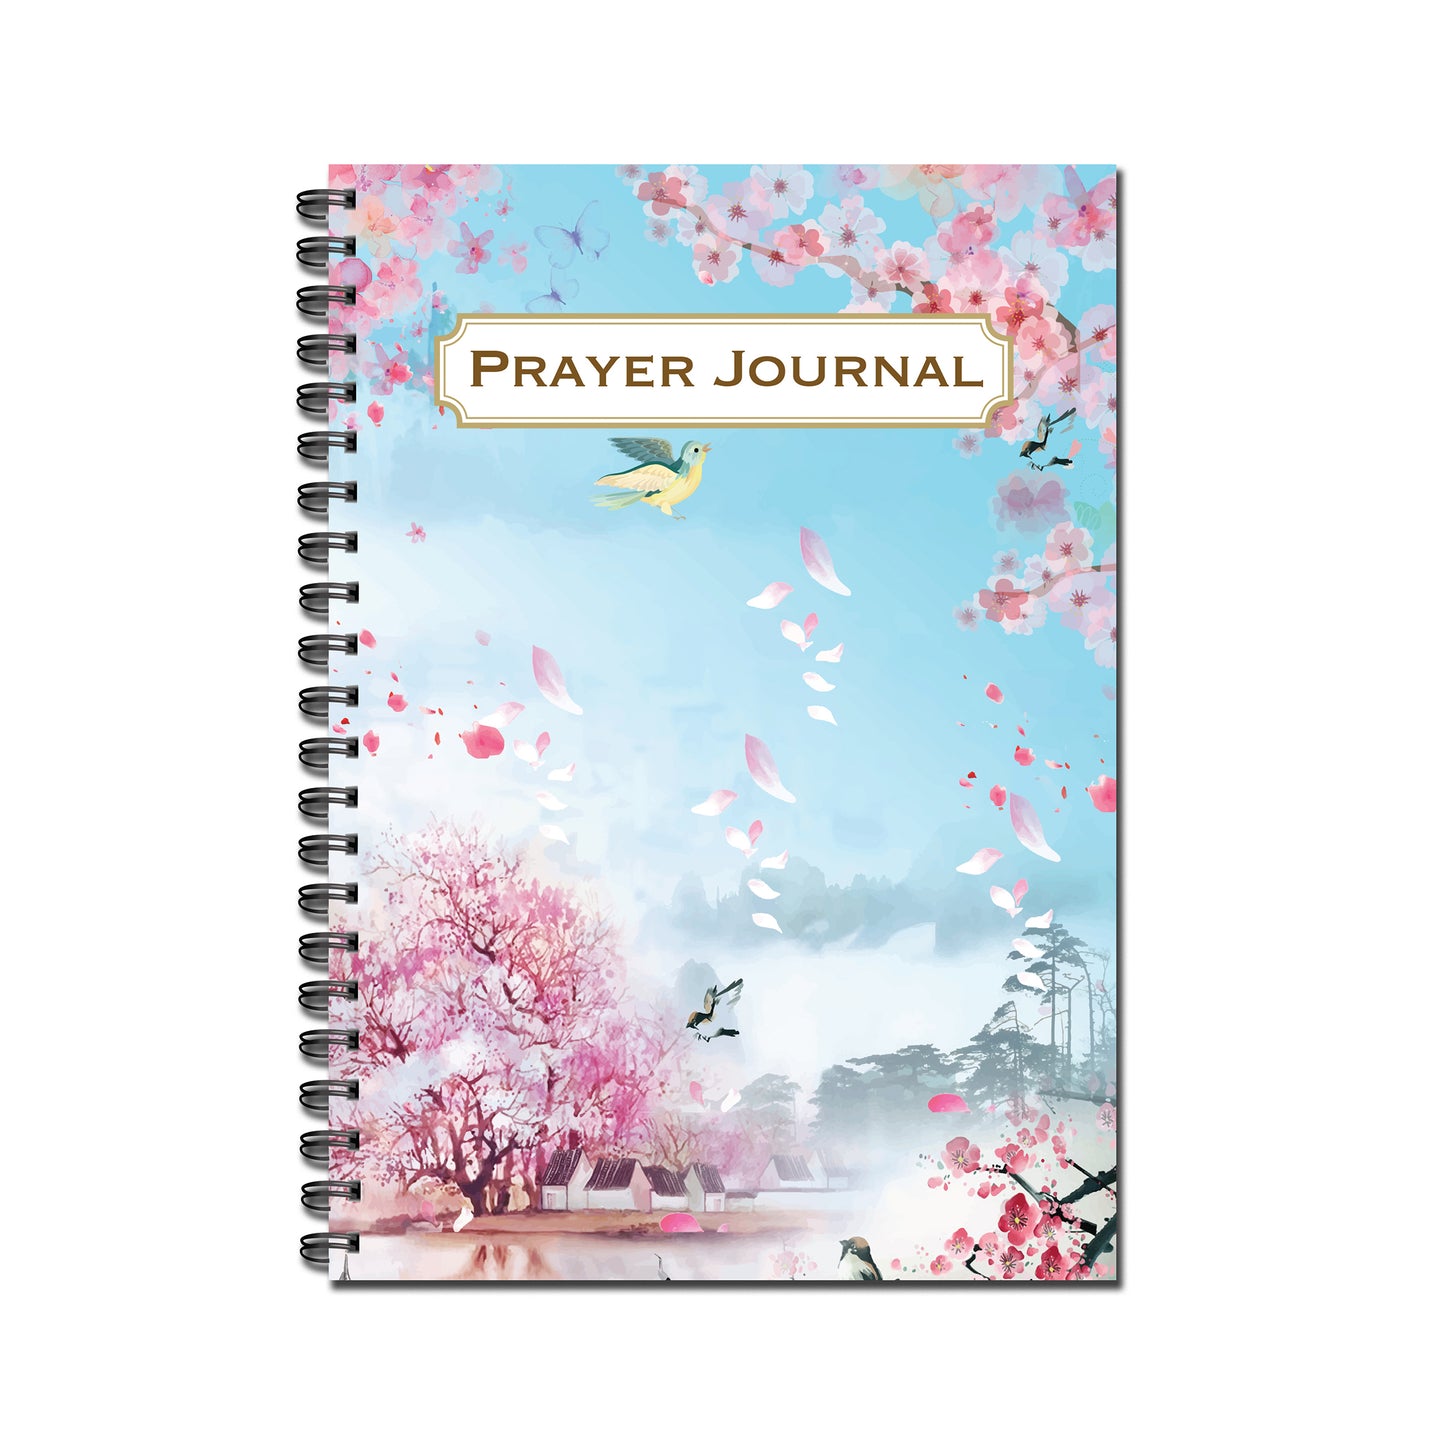 Prayer Journal | Notes | A5 (148mm x 210mm) | 50 double sided pages Wirobound